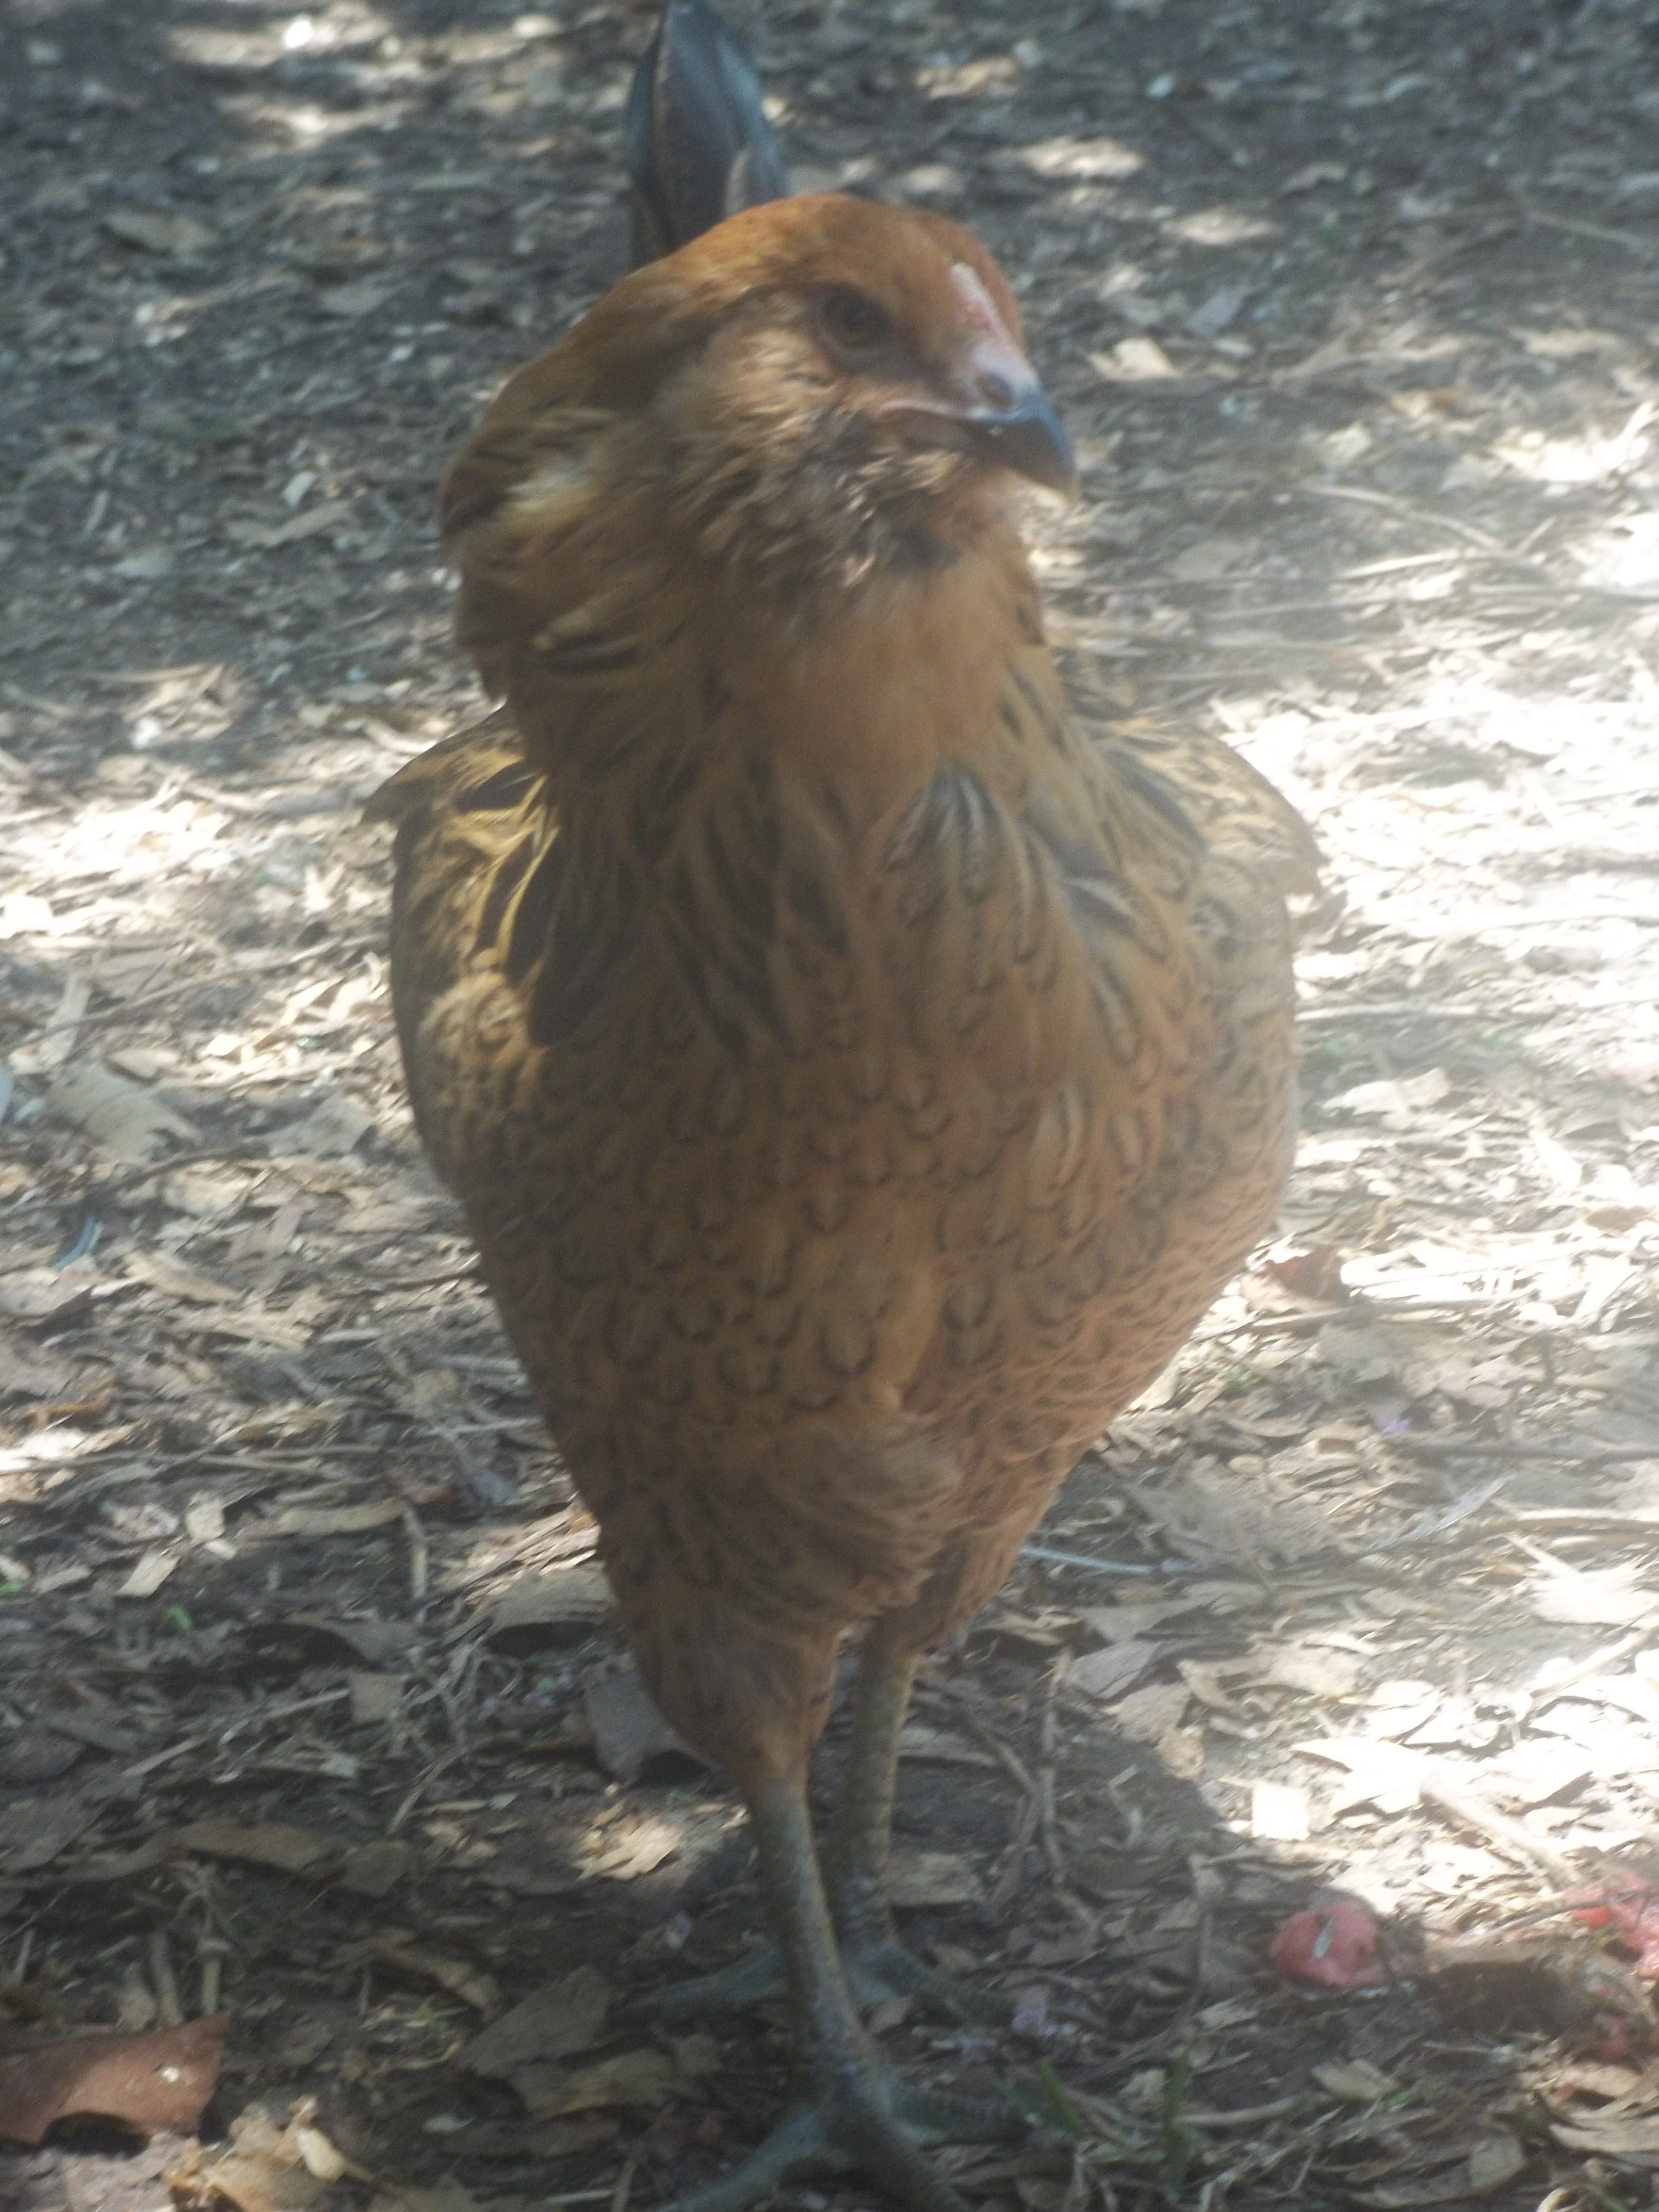 Caramel, female Americana. Likes Geckos, mice and worms. Got her as a pullet, she looks just like her mom which is where I got her name.